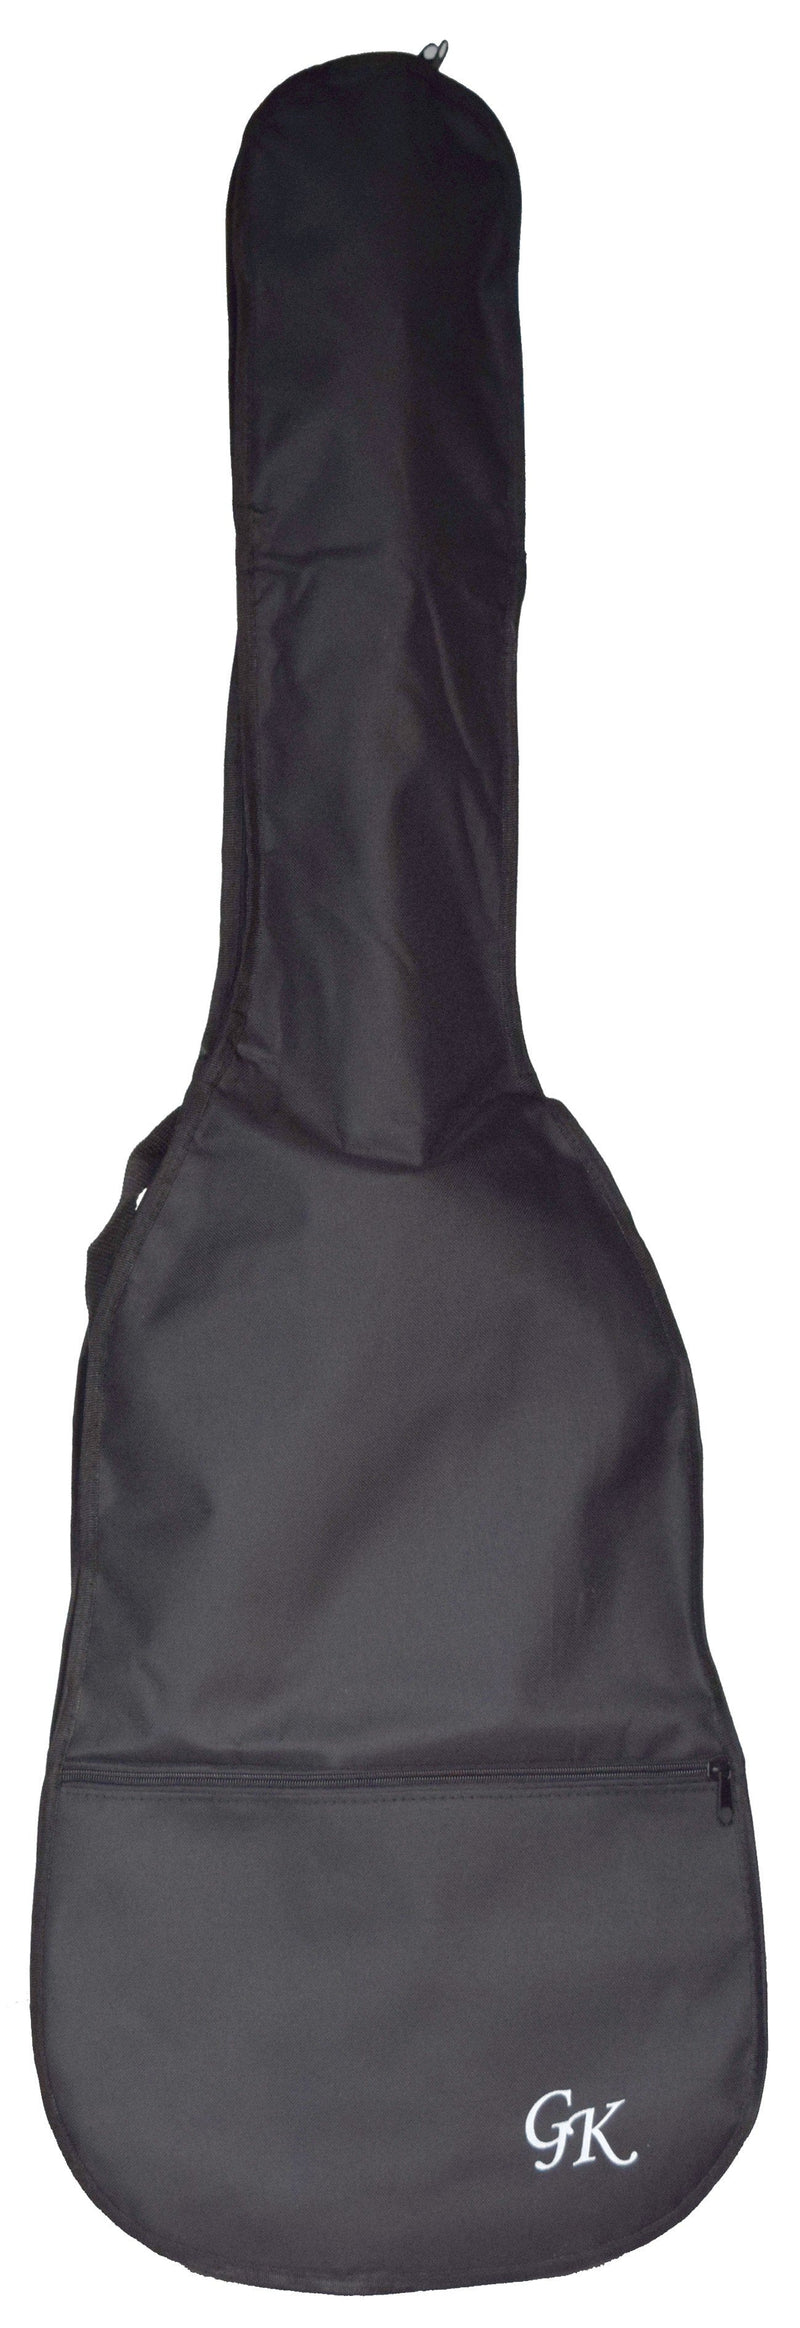 GK Electric Bass Guitar Bag GK Guitar Accessories for sale canada